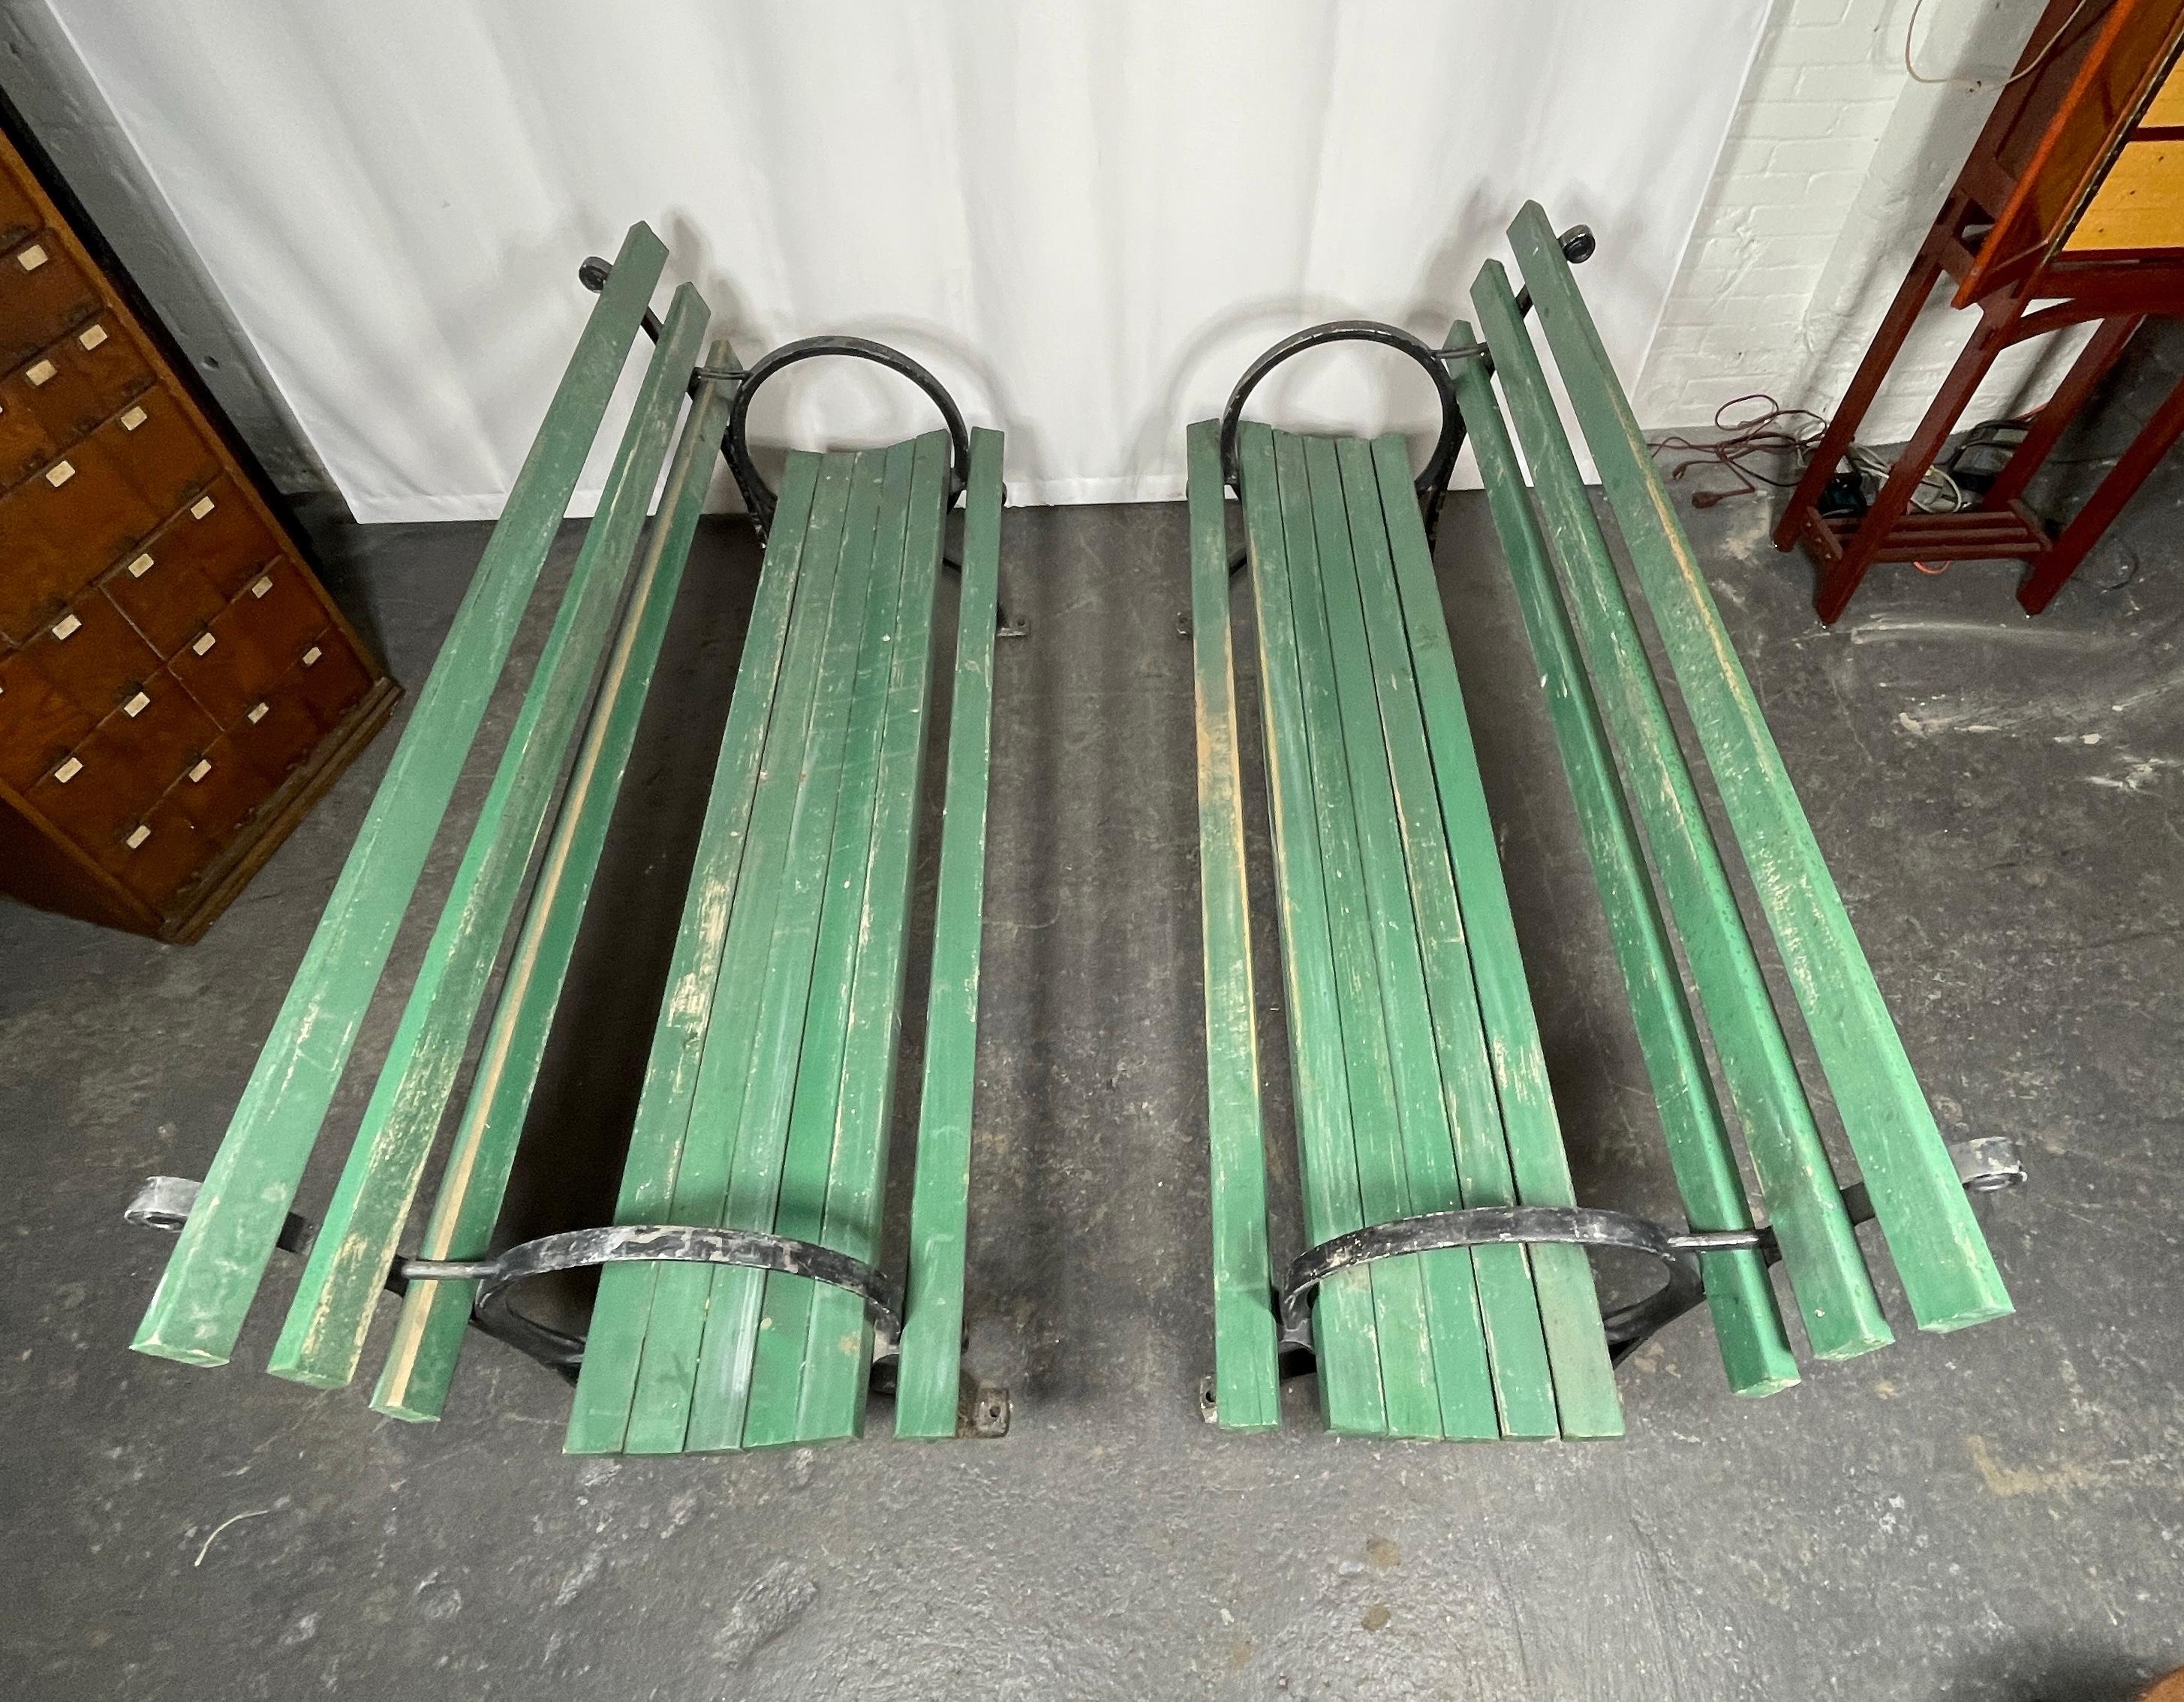 Canadian Classic Art Deco Style Garden Bench, 1939 Worlds Fair / Centrial Park / N.Y.C. For Sale